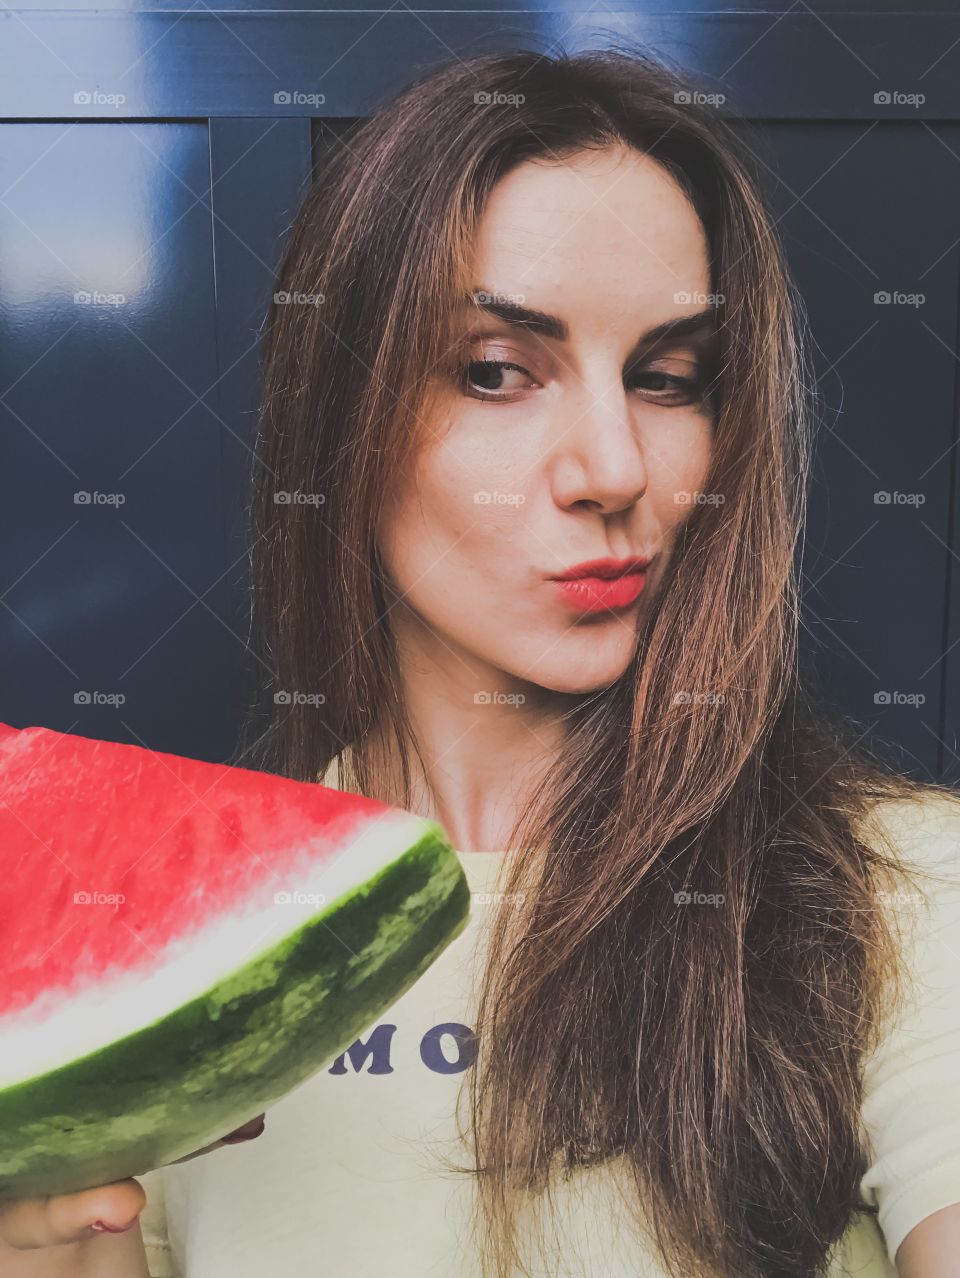 Summertime watermelon time. A girl with watermelon 